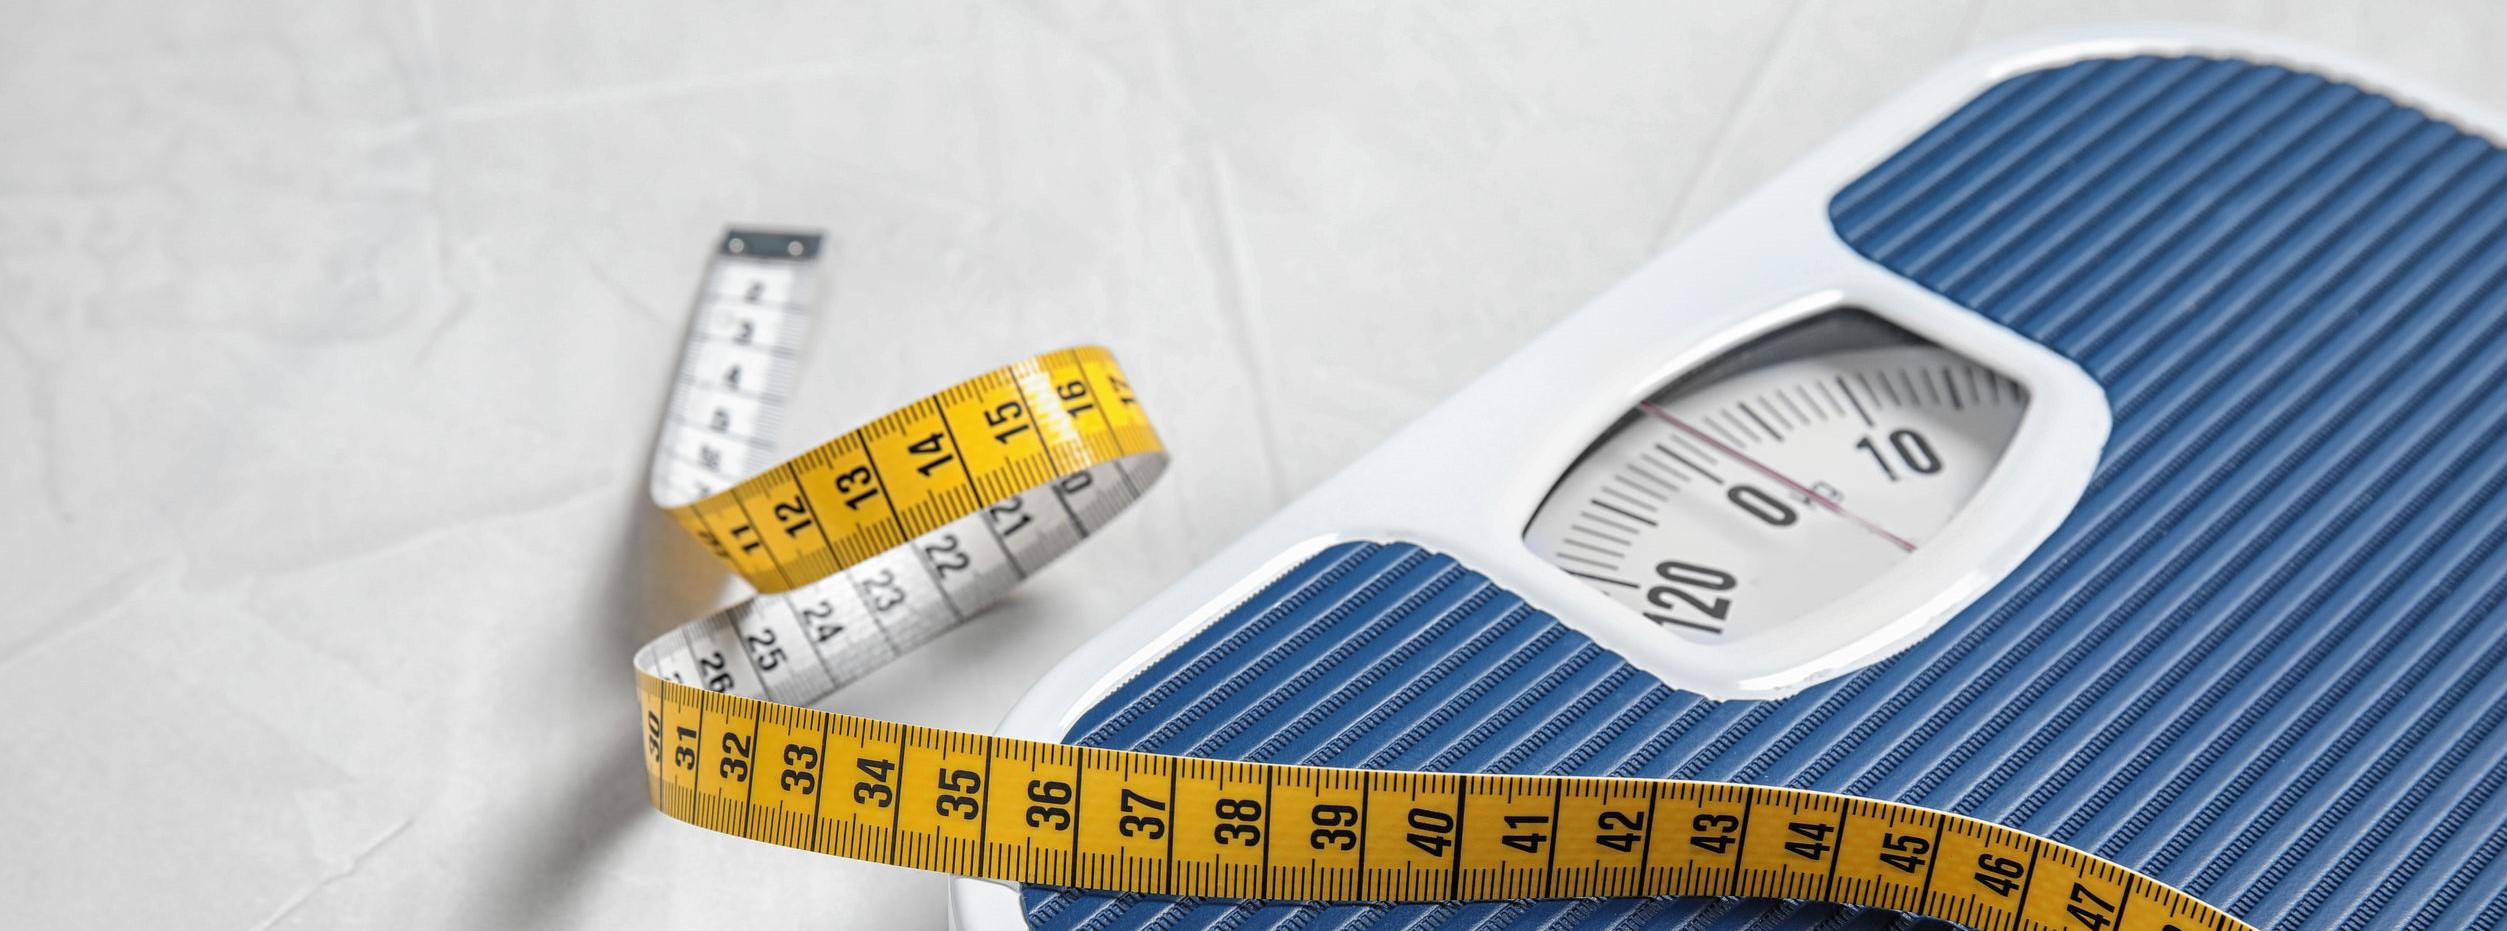 A picture of a scale and tape measure, tools for fast weight loss.